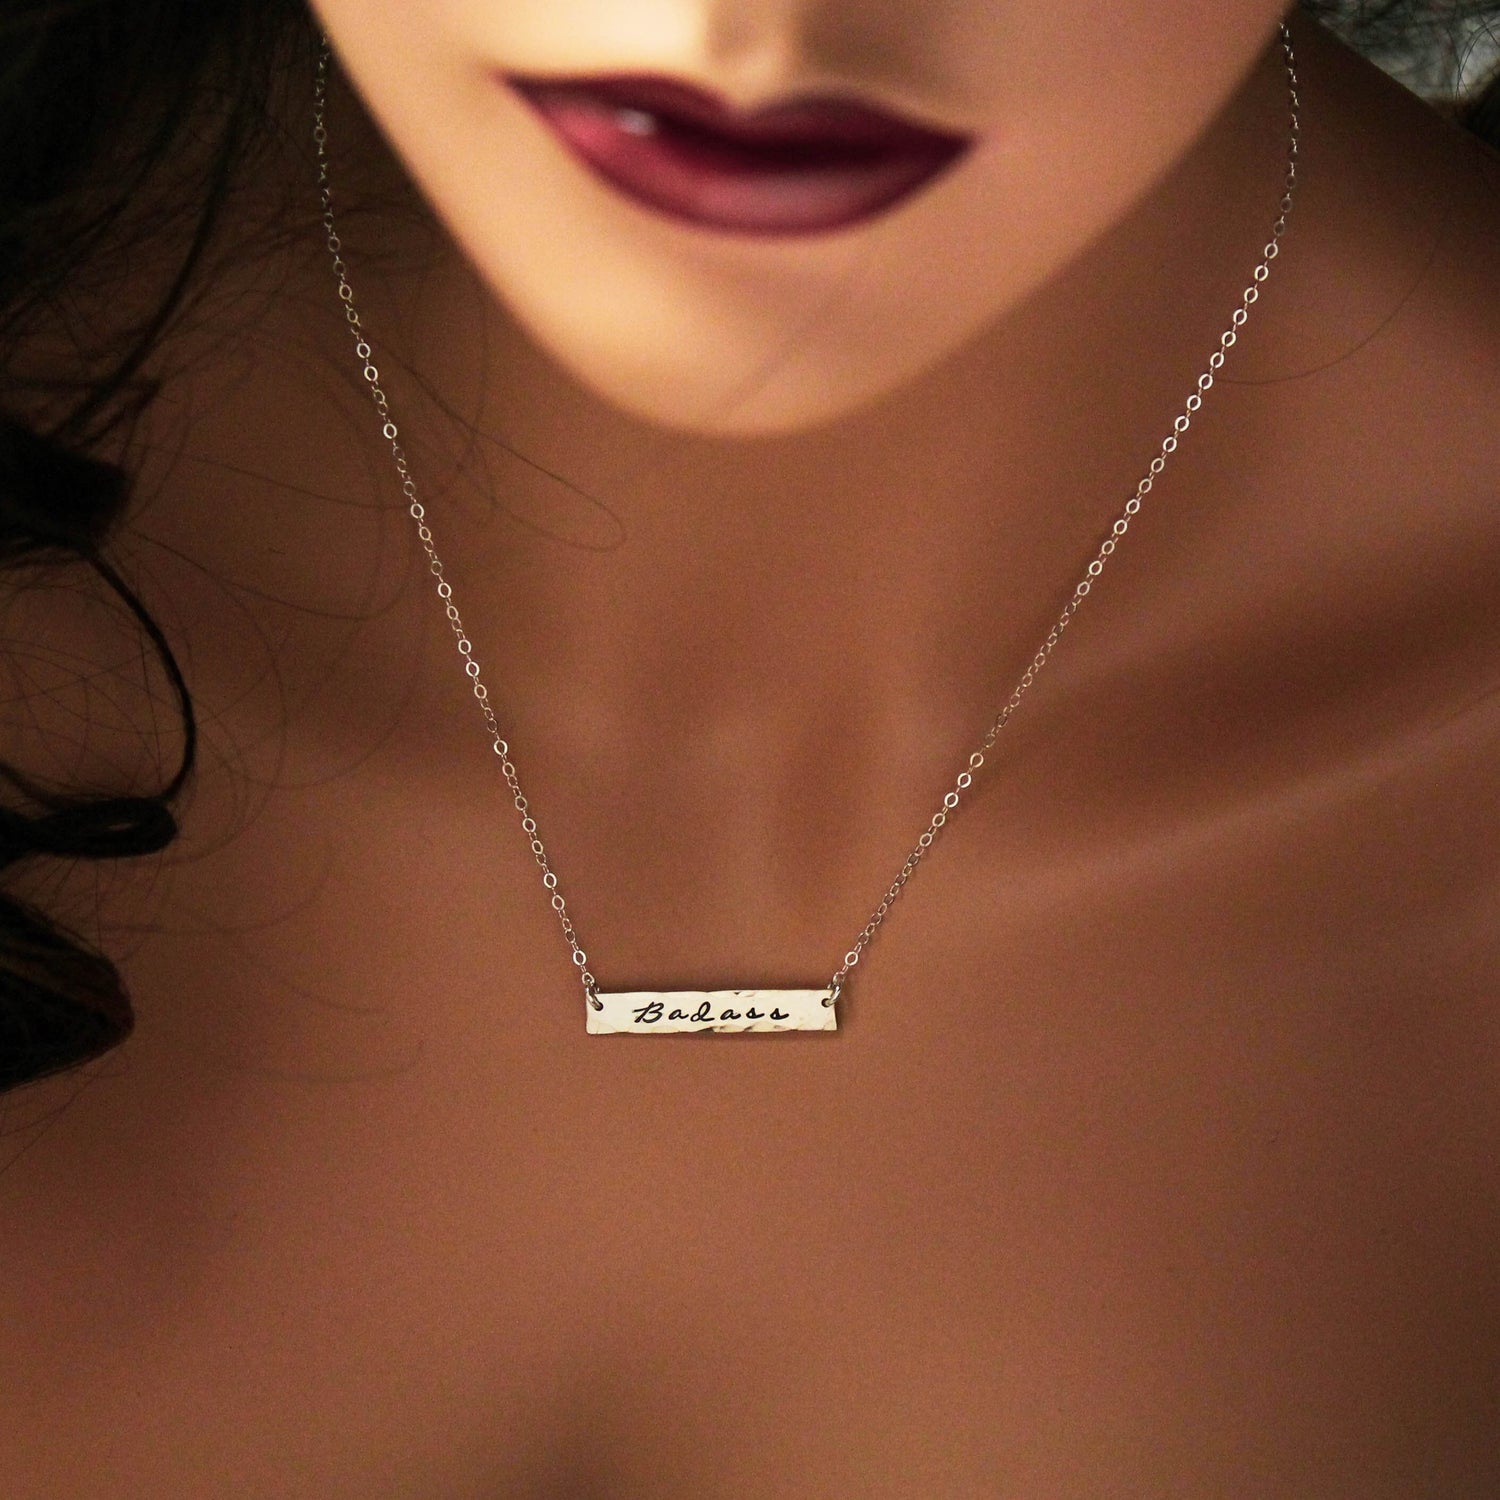 Badass Necklace in Sterling Silver, Badass, Hand Stamped Bar Necklace, Badass Bar Necklace, Curse Word Explicit Jewelry, Gift for Her